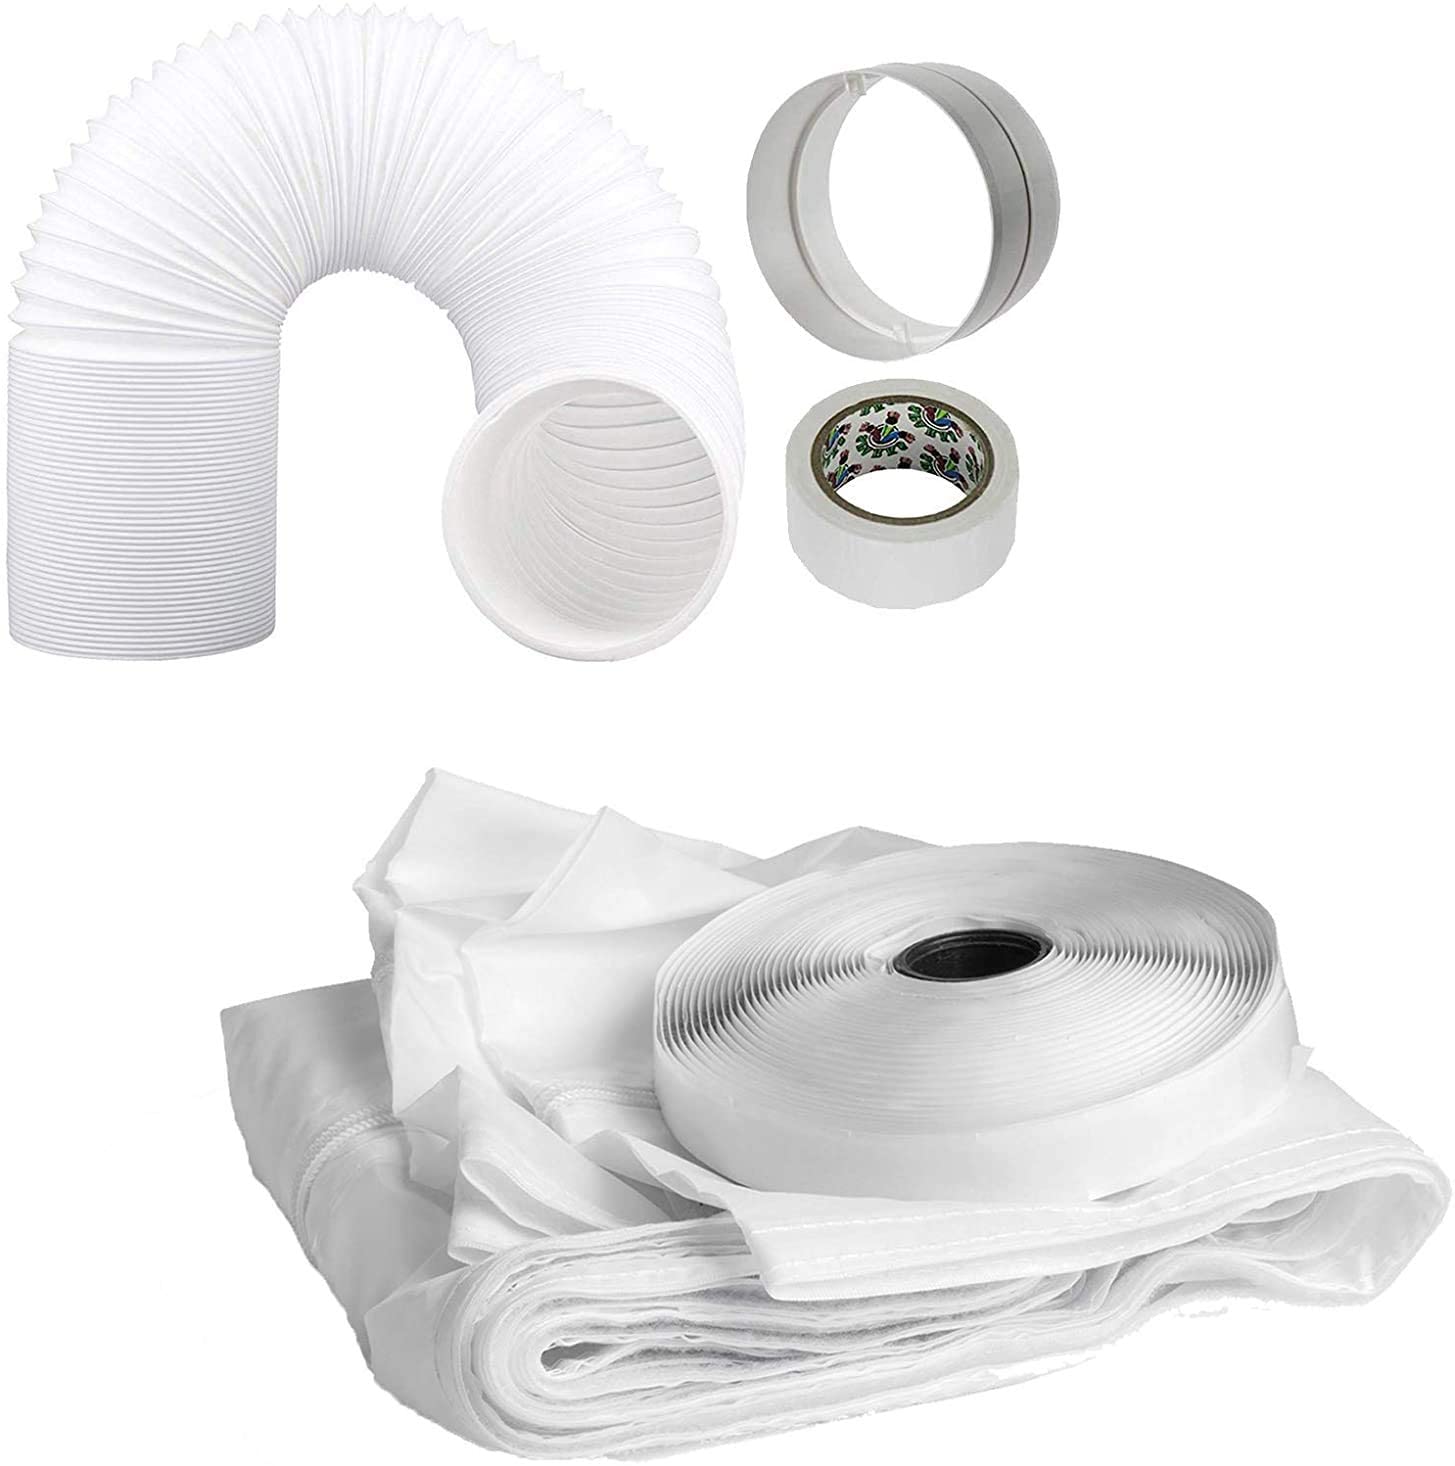 UNIVERSAL Window Seal Kit + 3 Metre Vent Hose, Tape + Adapter for Tumble Dryer or Washer Dryer